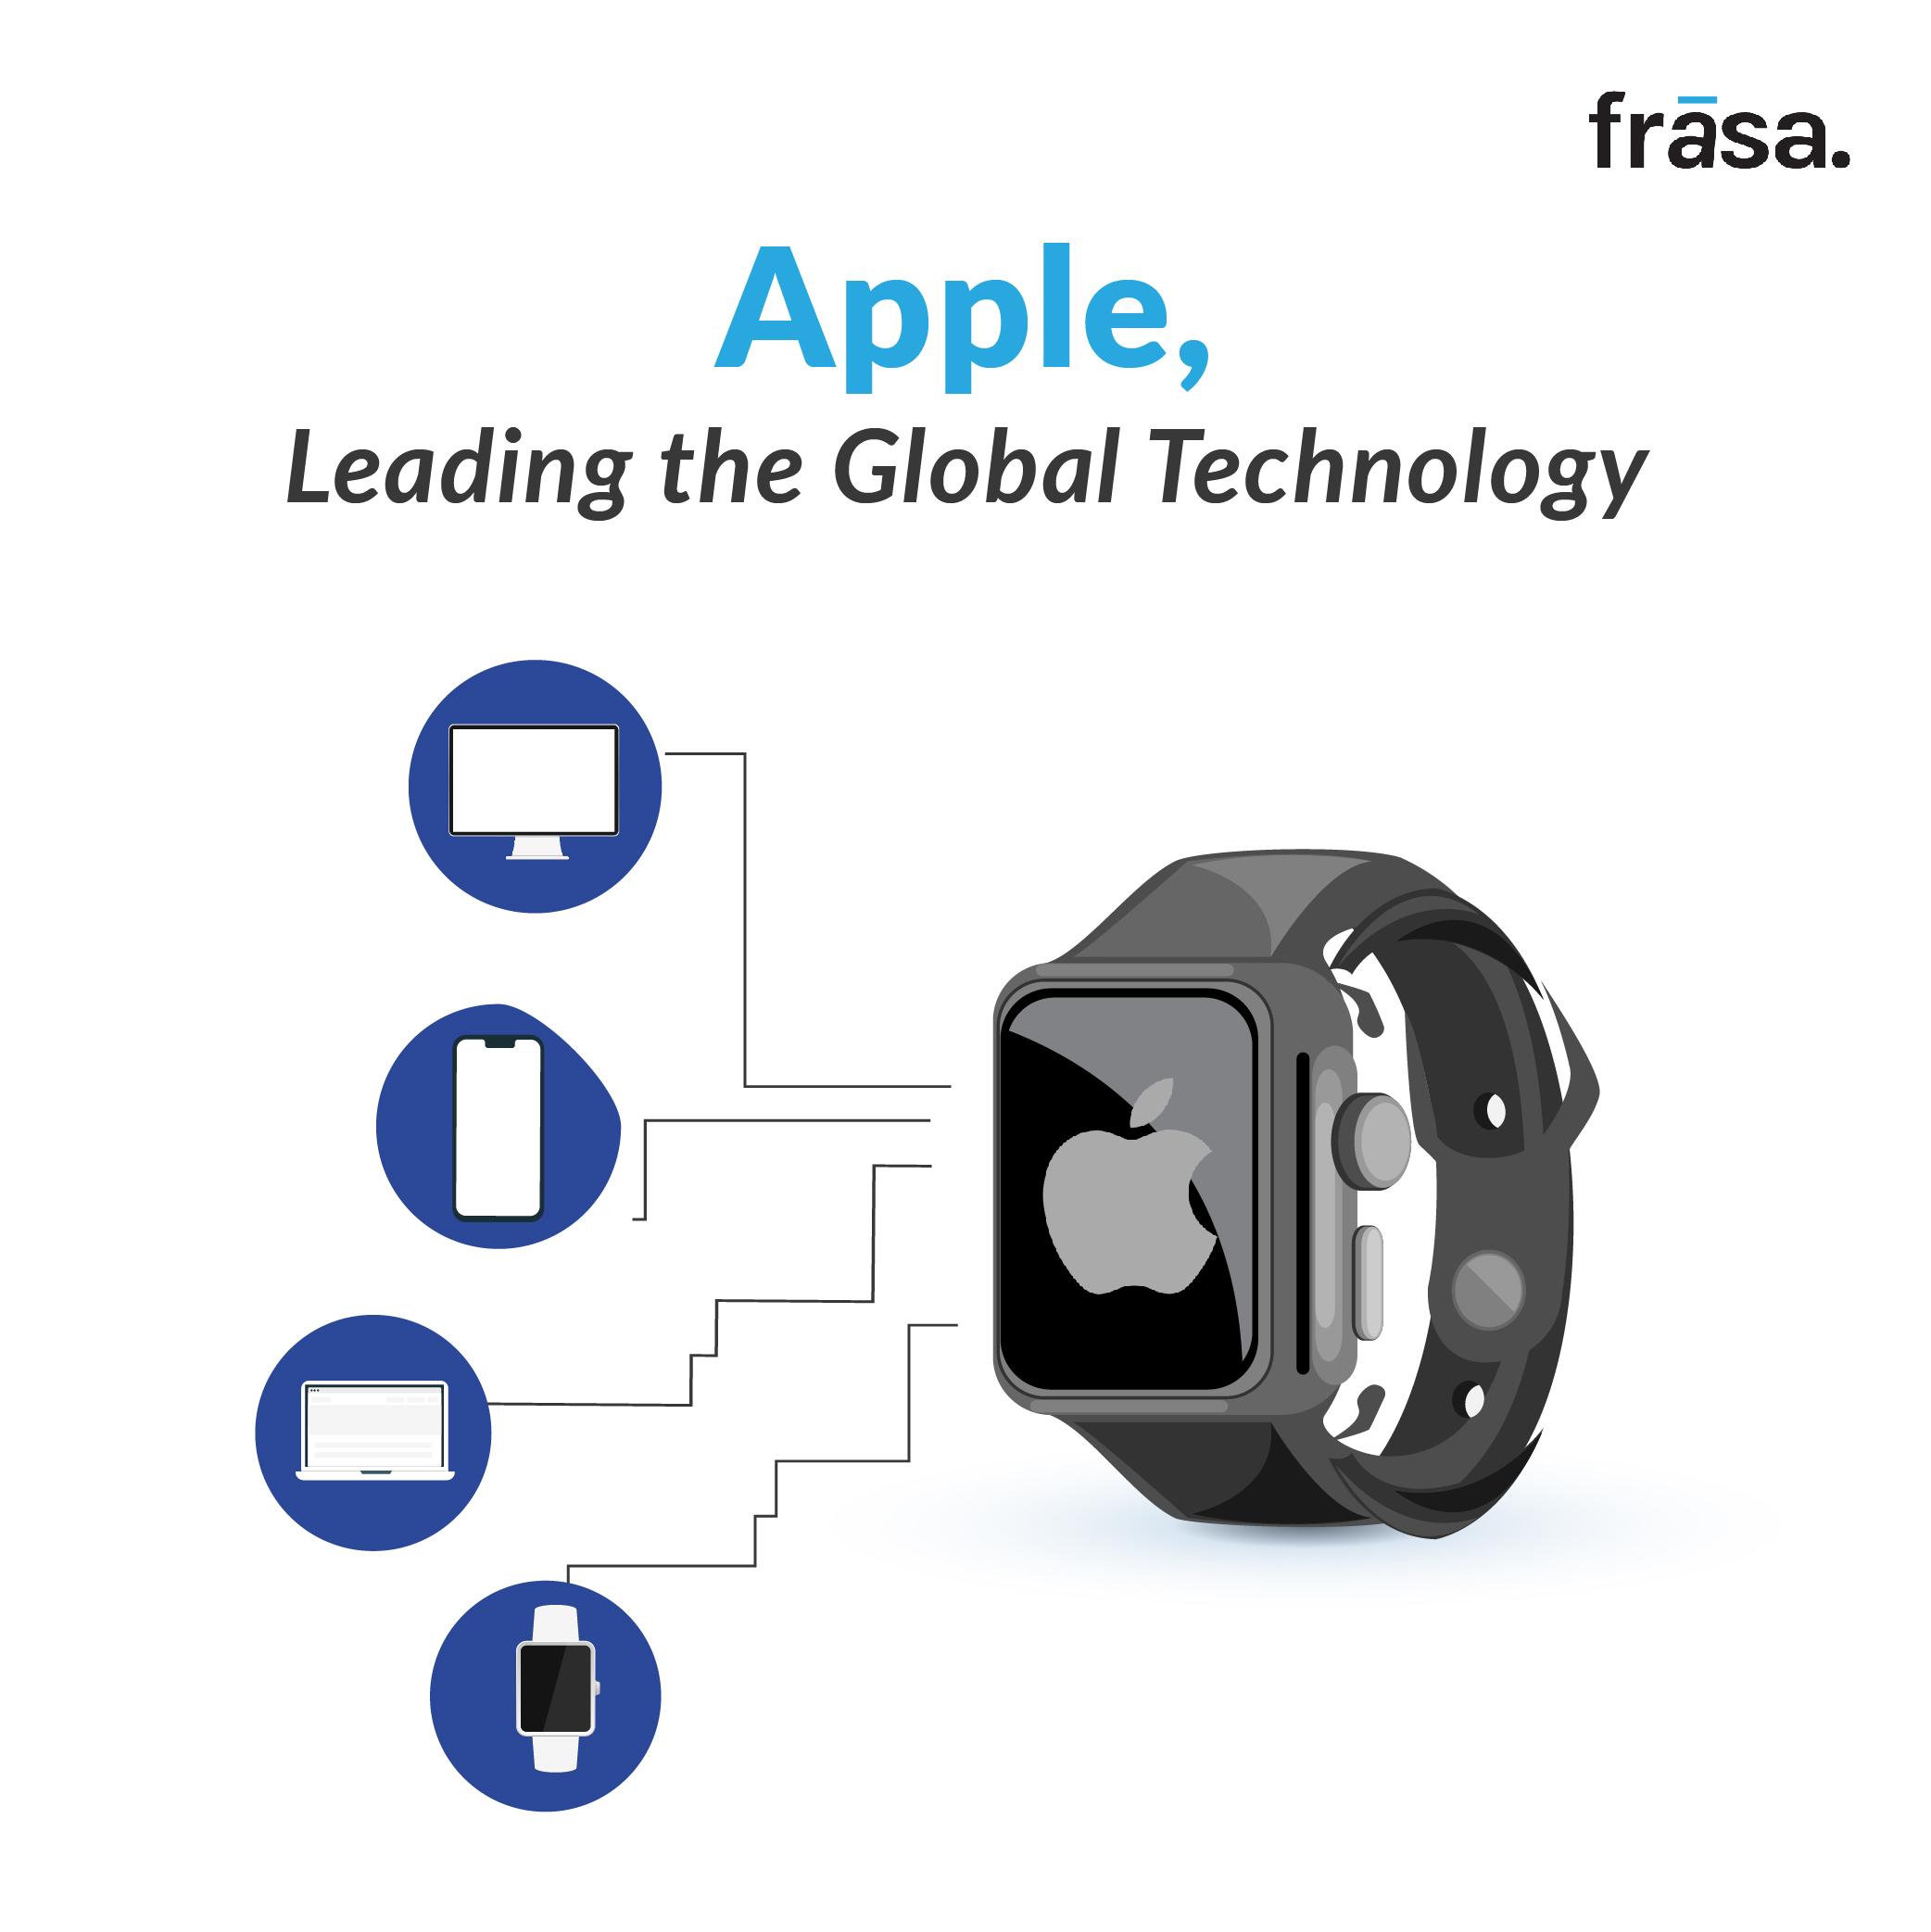 Apple, Leading the Global Technology